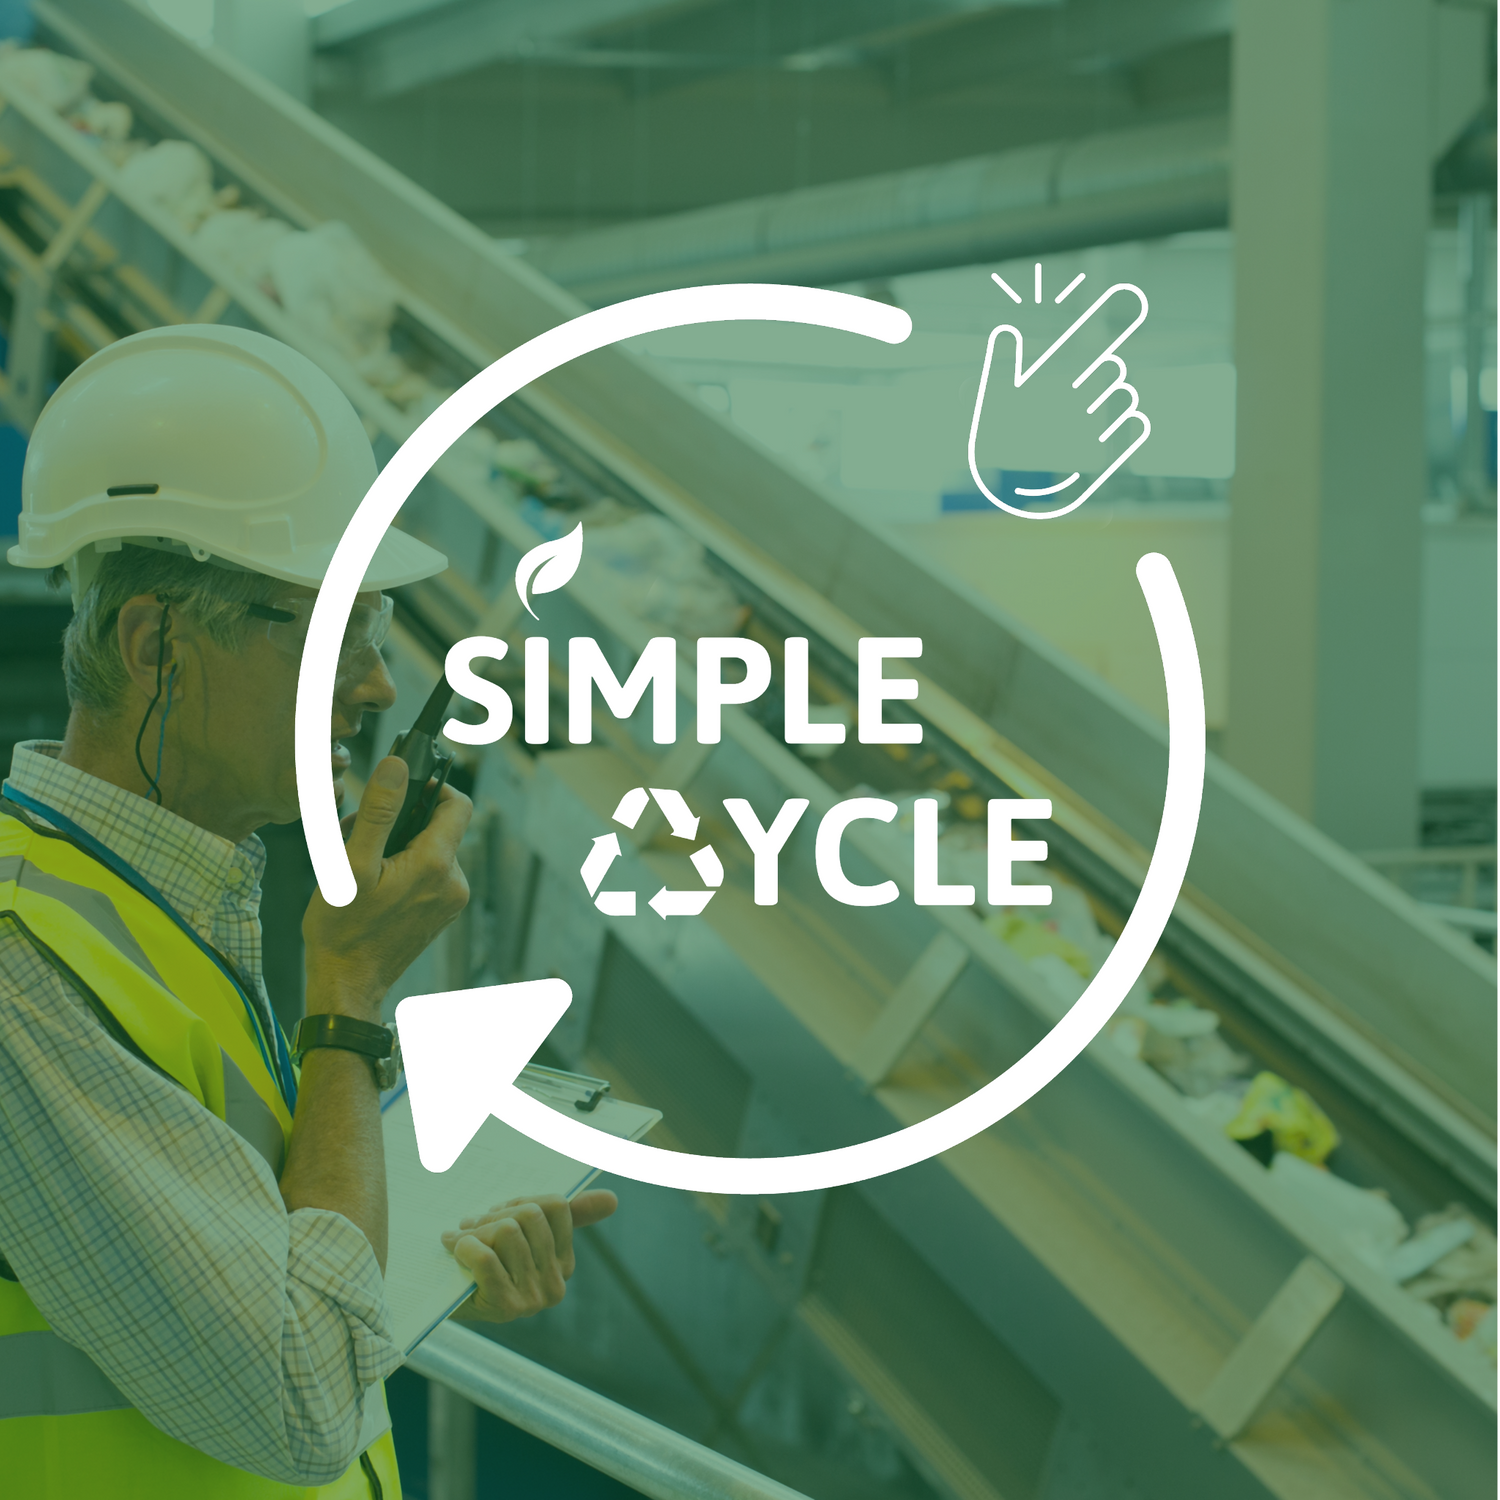 The SimpleCycle logo over a man talking on a walkie talkie in a recycling factory.